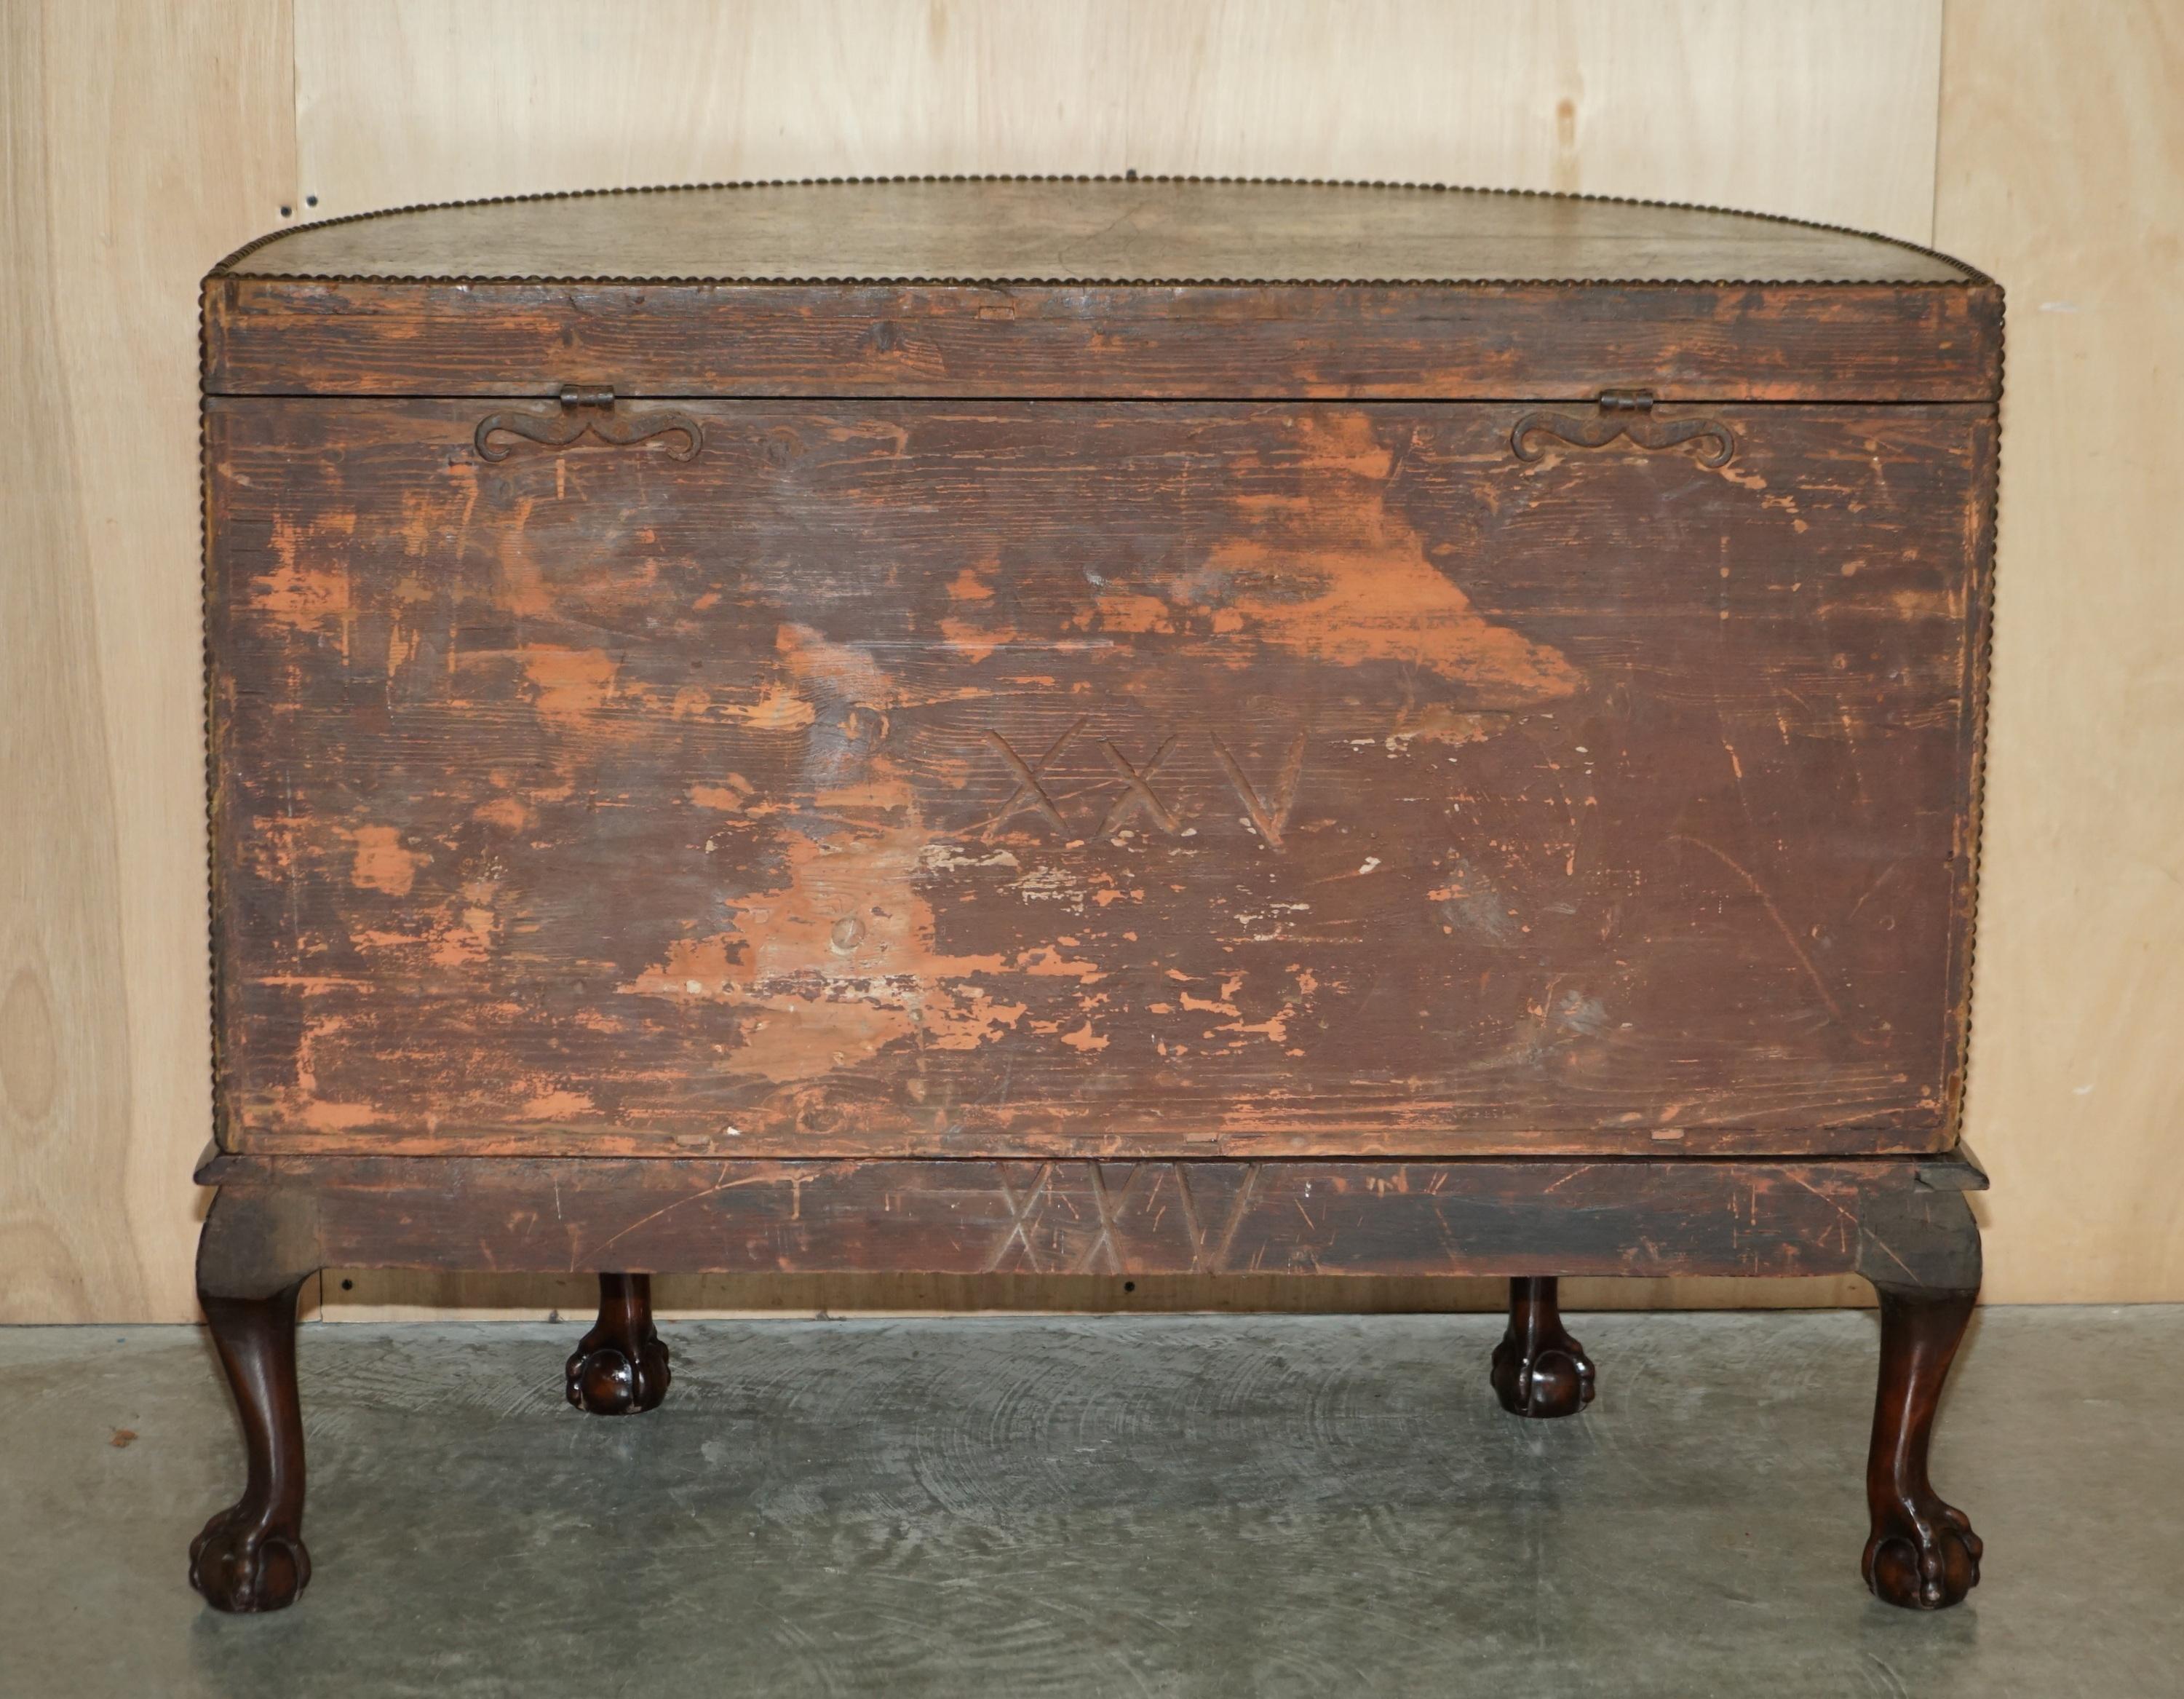 IMPORTANT ANTIQUE MUSEUM QUALITY CLAW & BALL LEATHER PAiNTED HALF MOOD SIDEBOARD For Sale 7